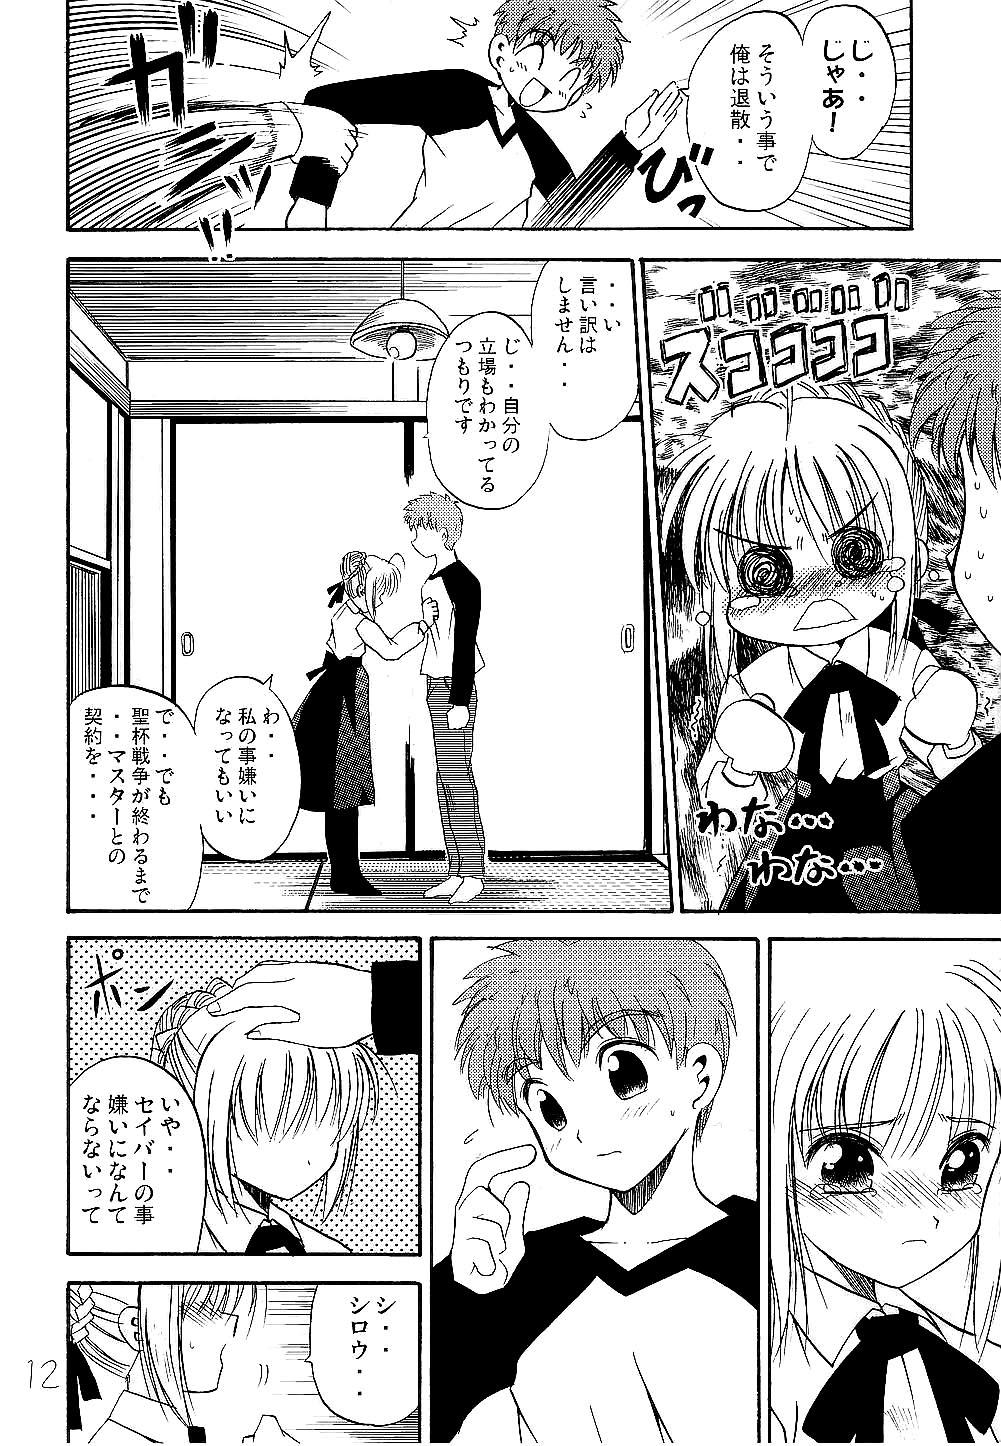 Freaky Saber Crash! - Fate stay night Amateur - Page 11